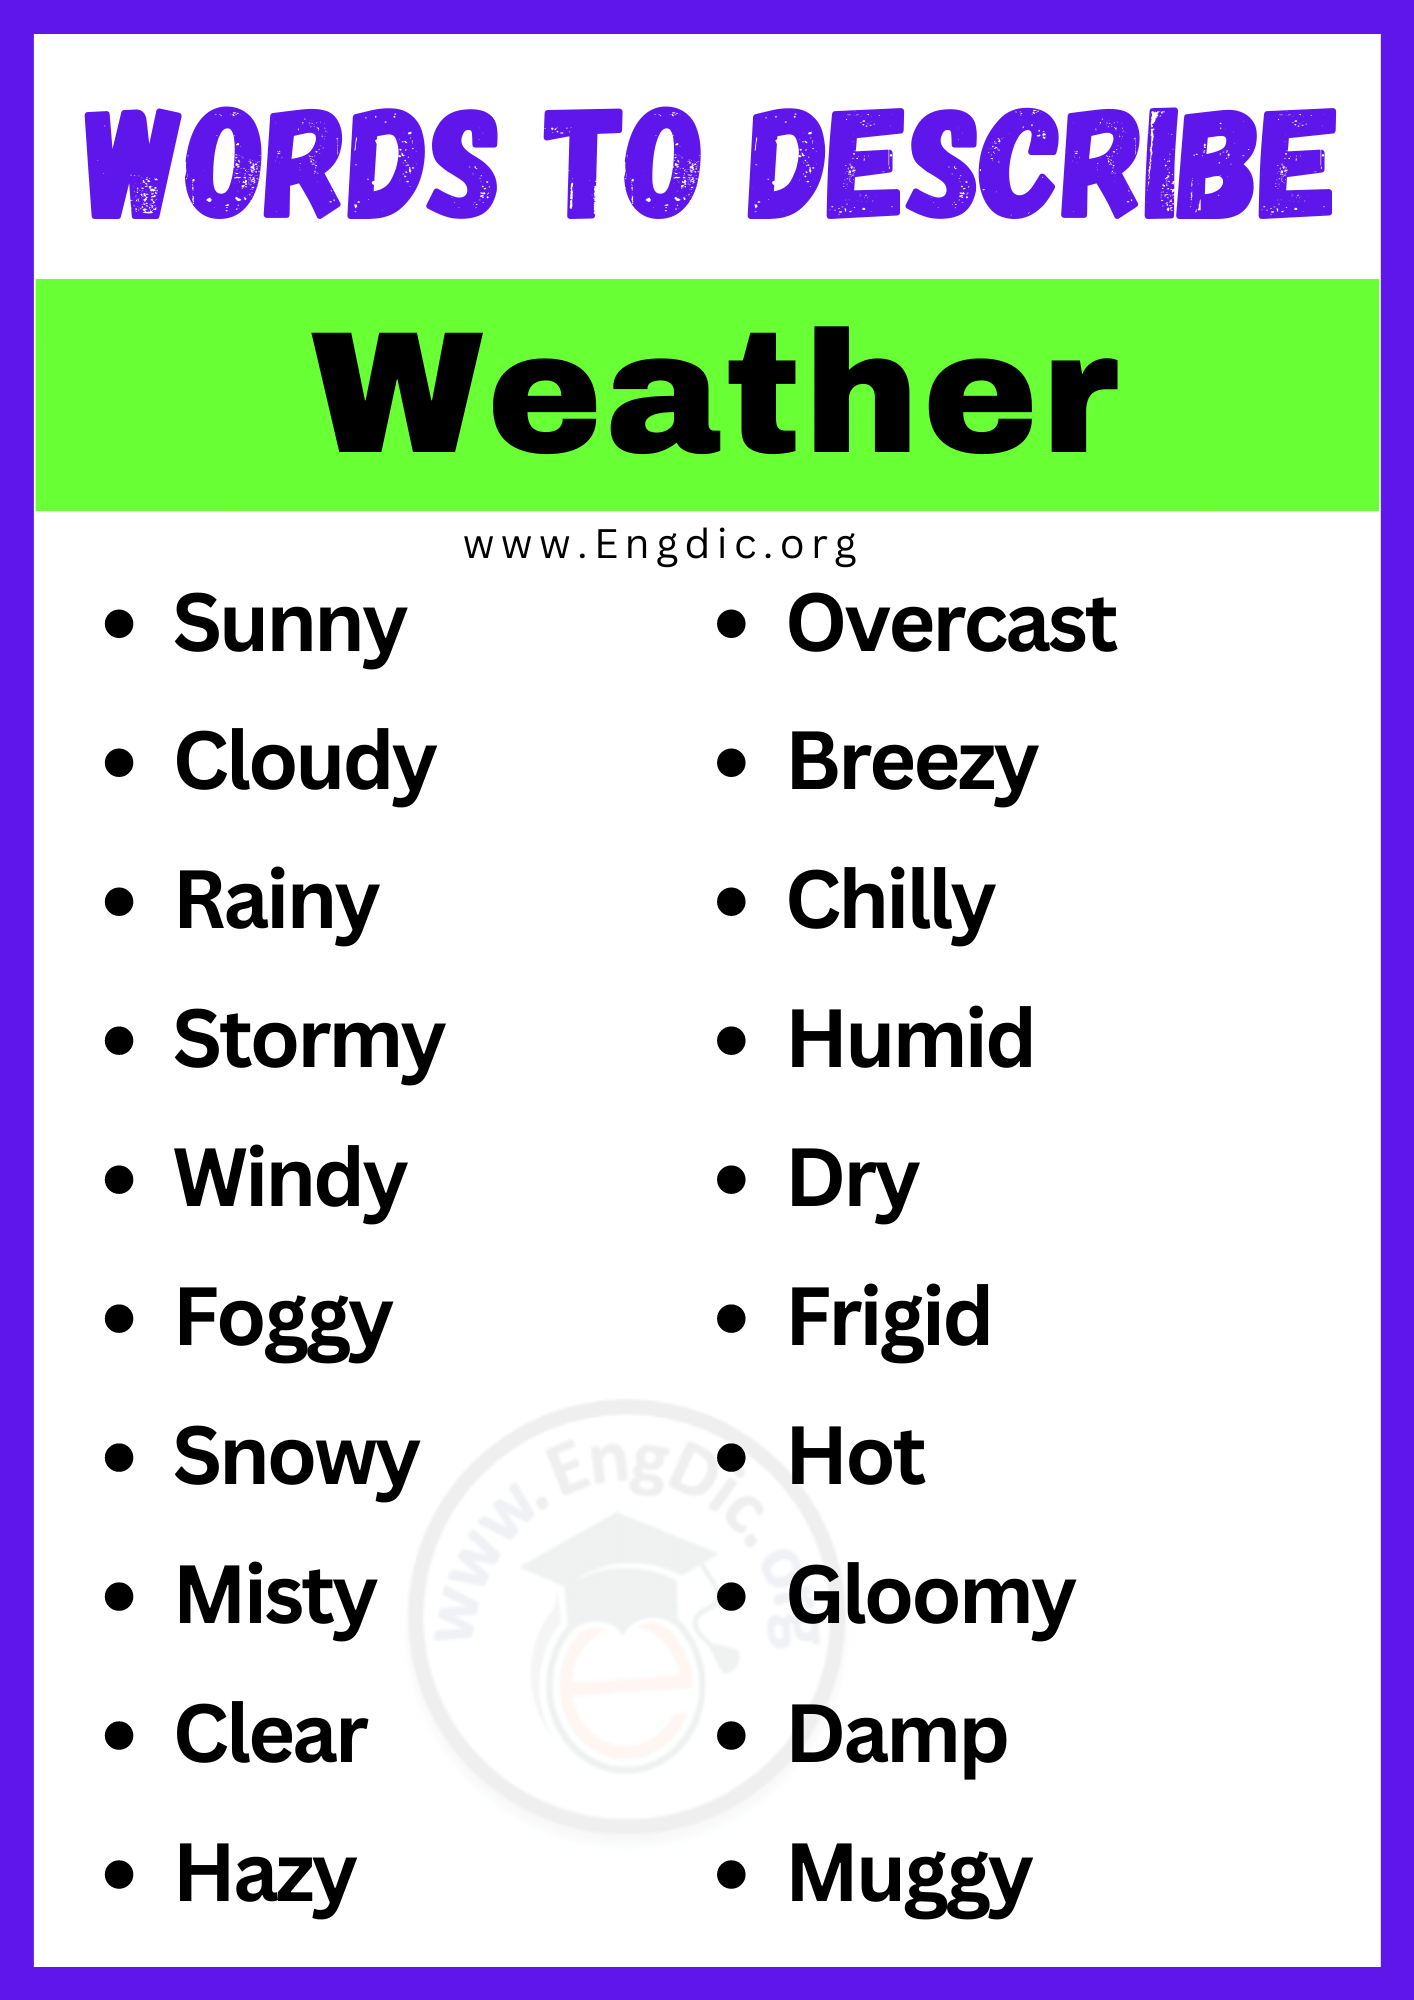 Words to Describe Weather